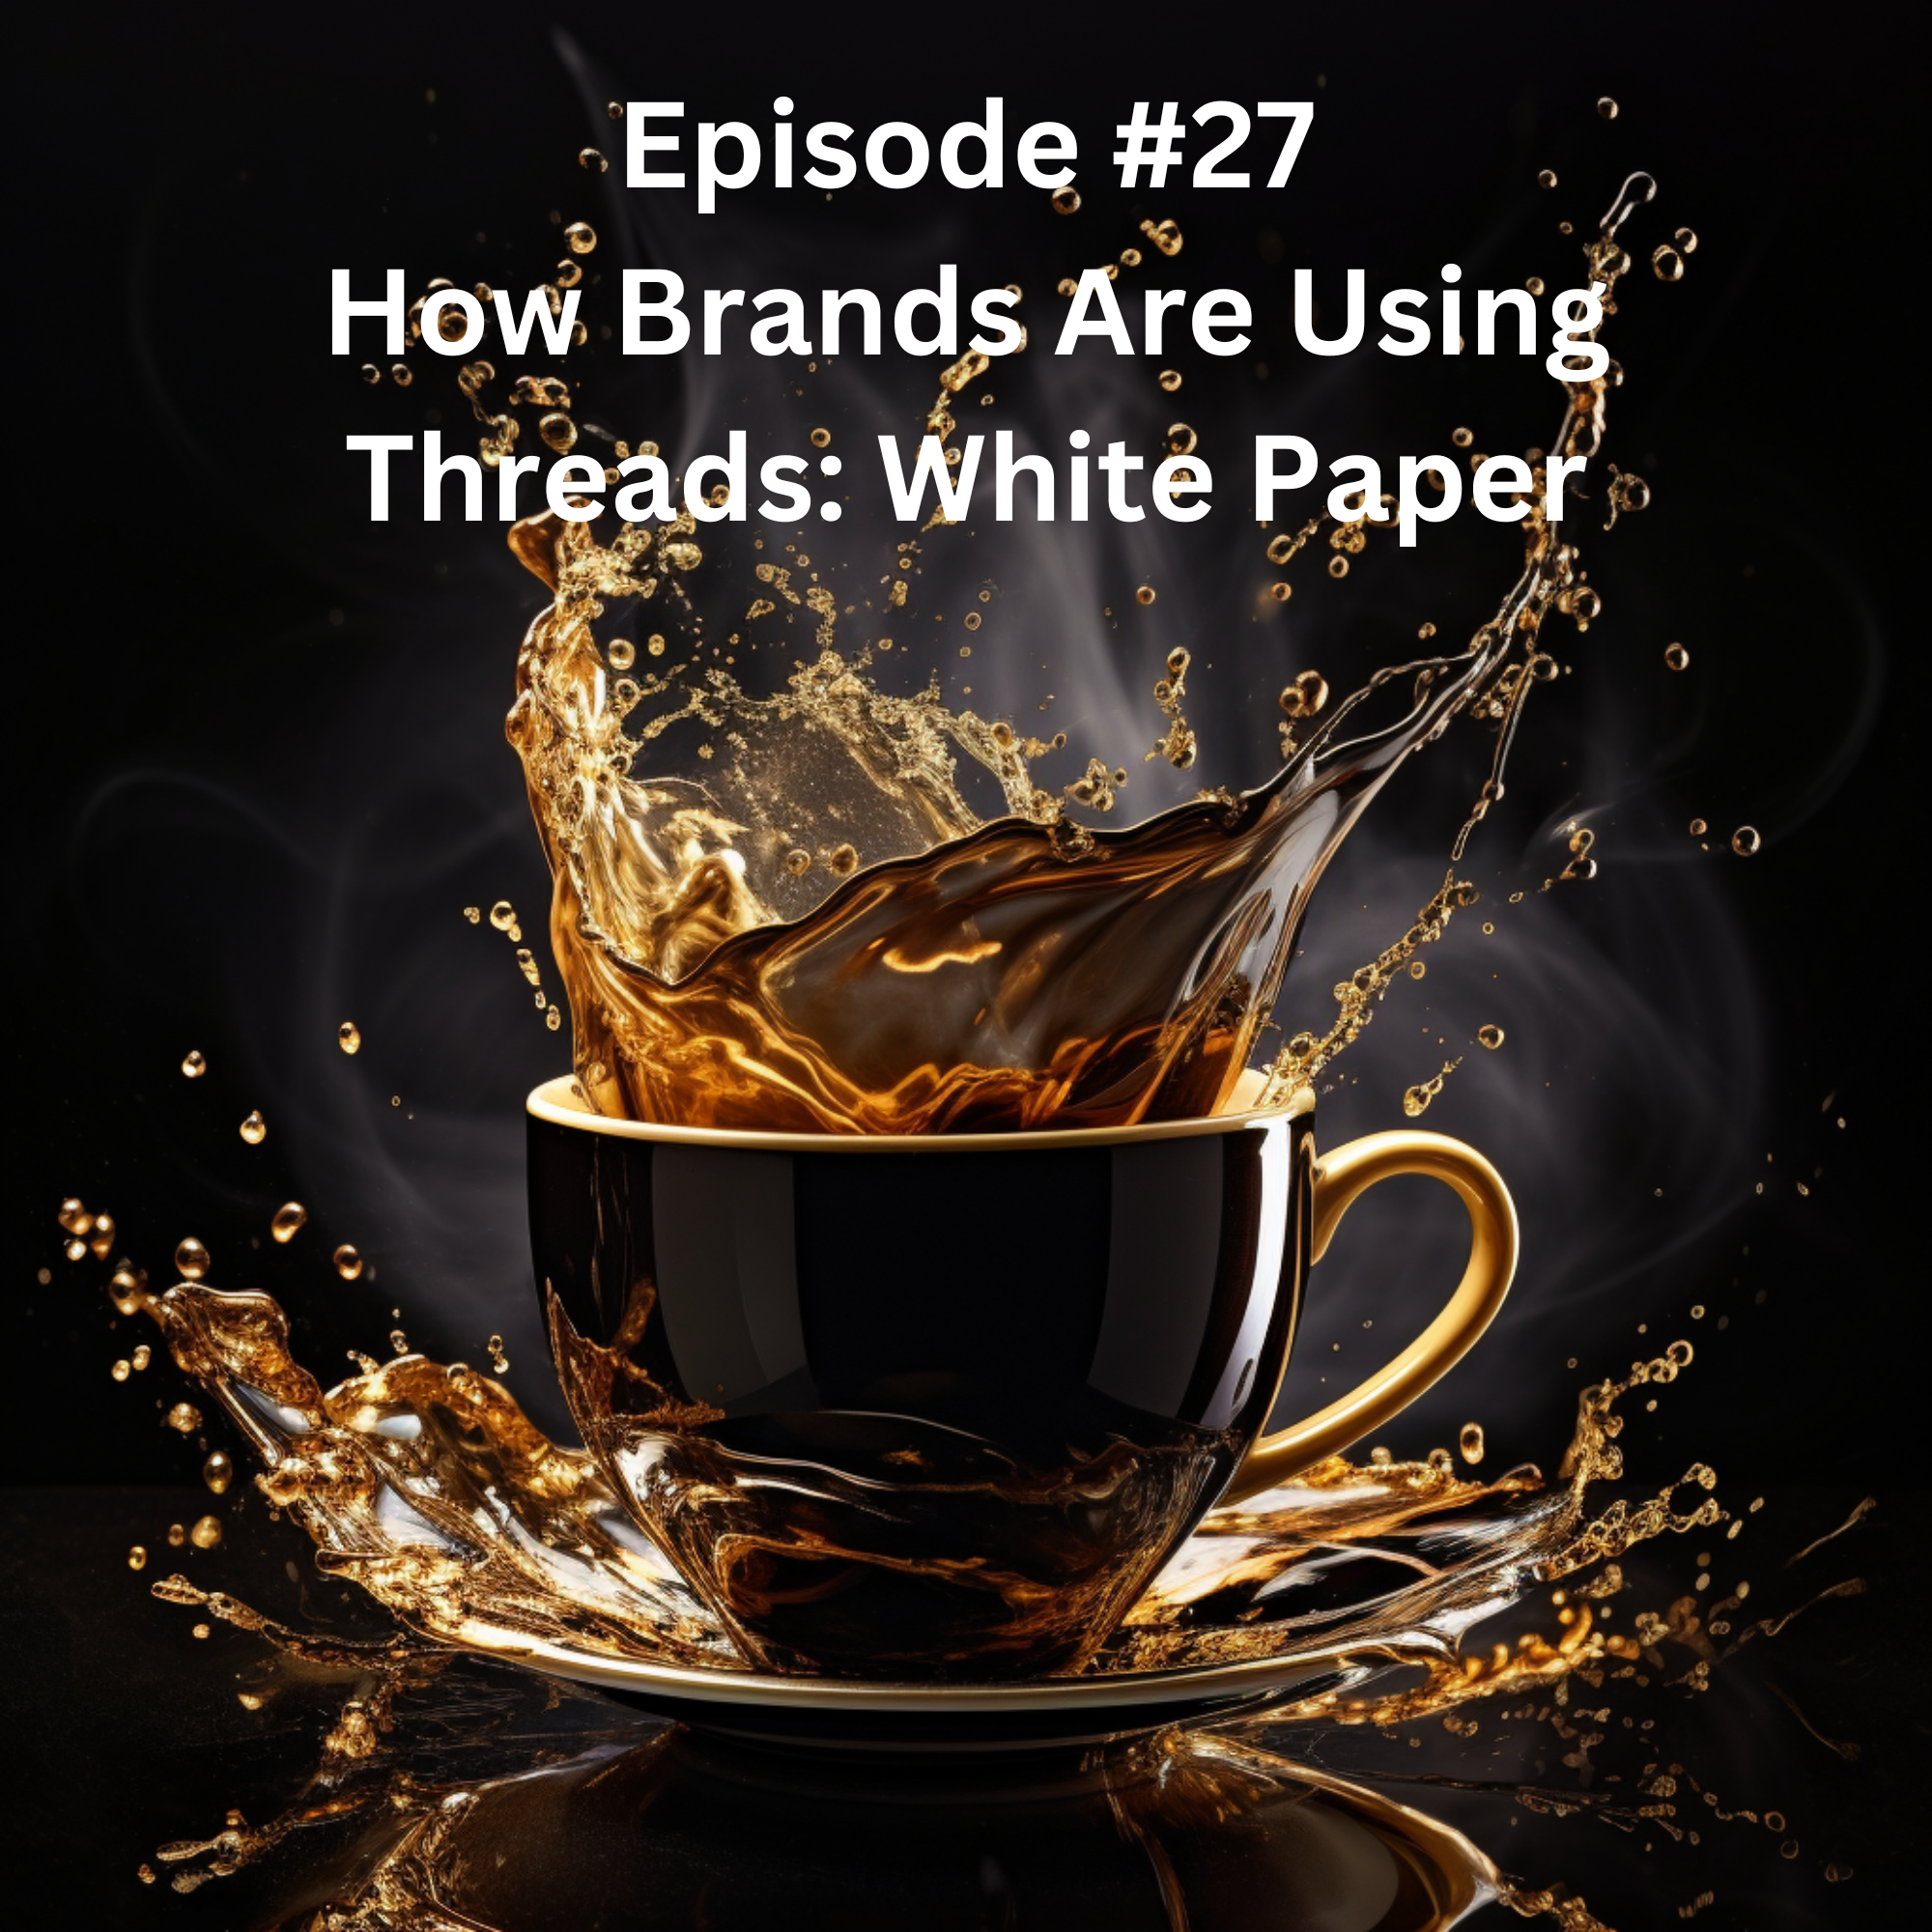 Episode #27: How Brands Are Using Threads: A White Paper